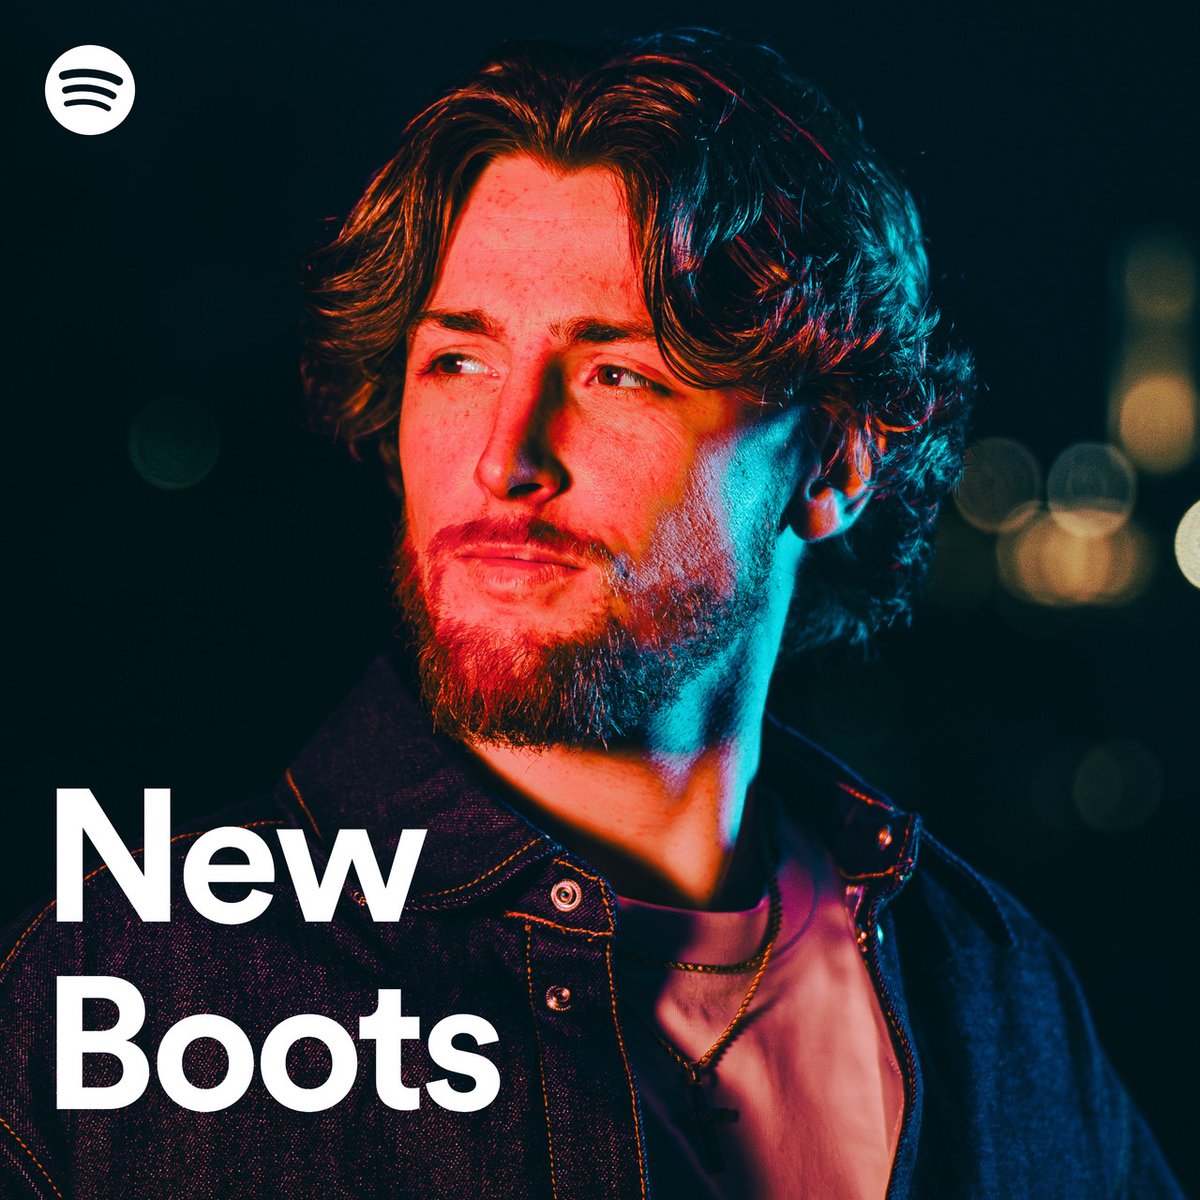 So surreal to see my face on the new boots playlist cover 😮‍💨 @Spotify love you guys so much ❤️ Listen here: open.spotify.com/playlist/37i9d…